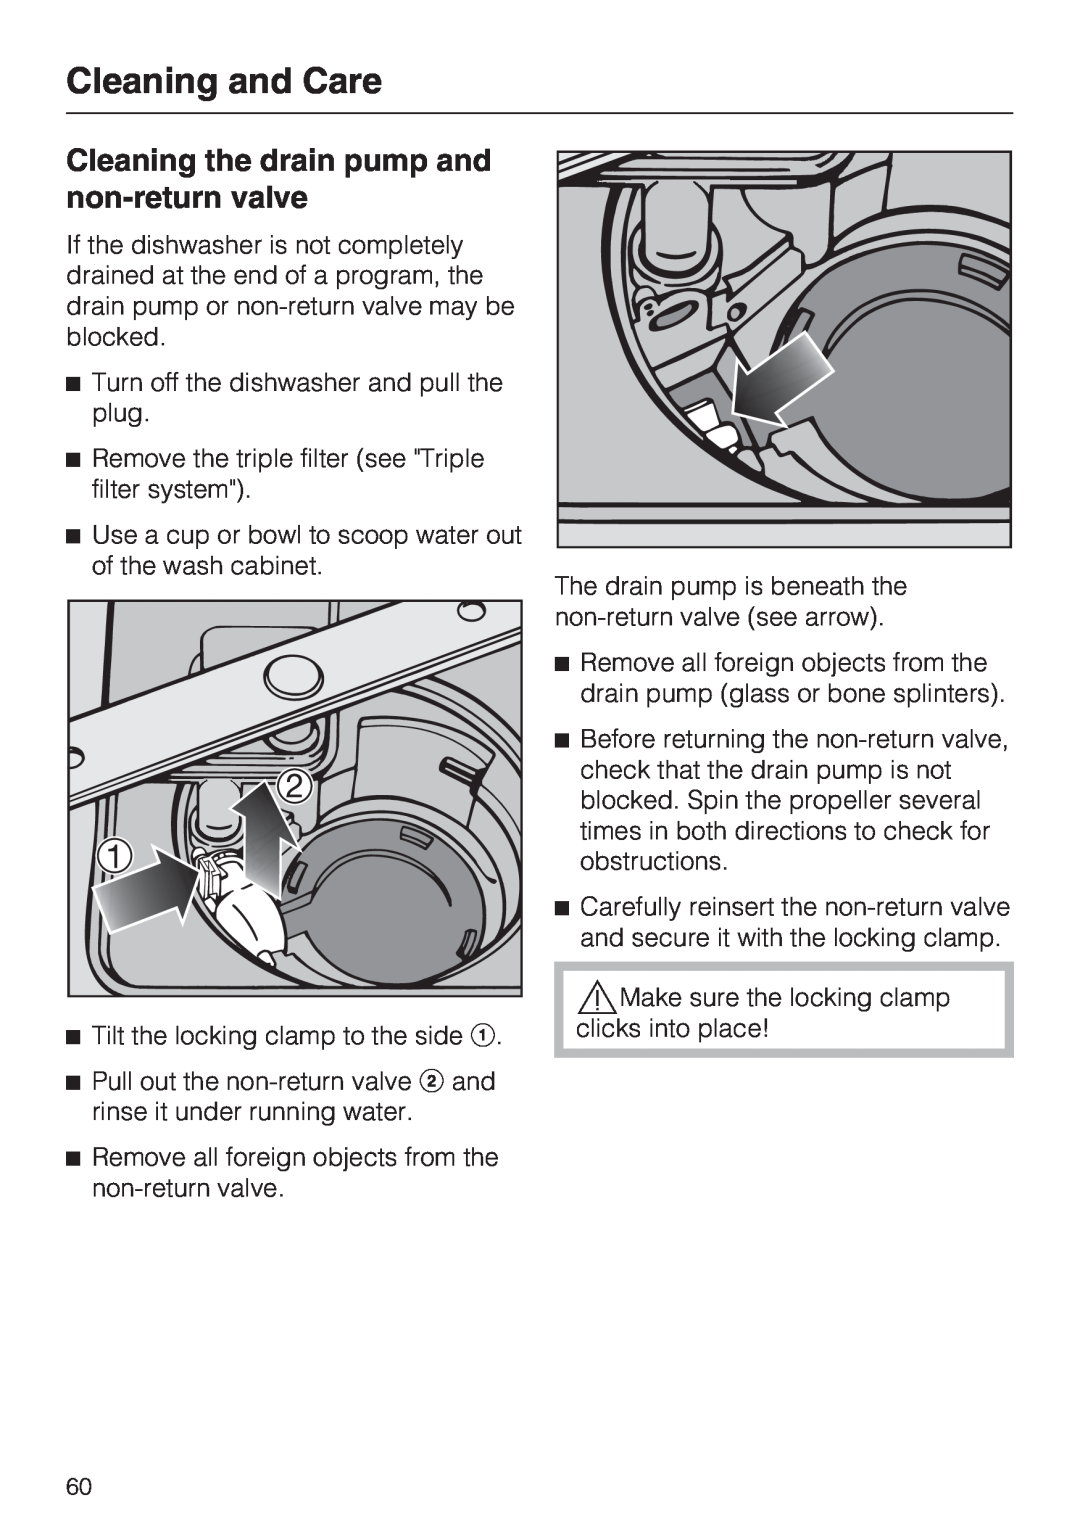 Miele G5605, G5600 manual Cleaning the drain pump and non-returnvalve, Cleaning and Care 